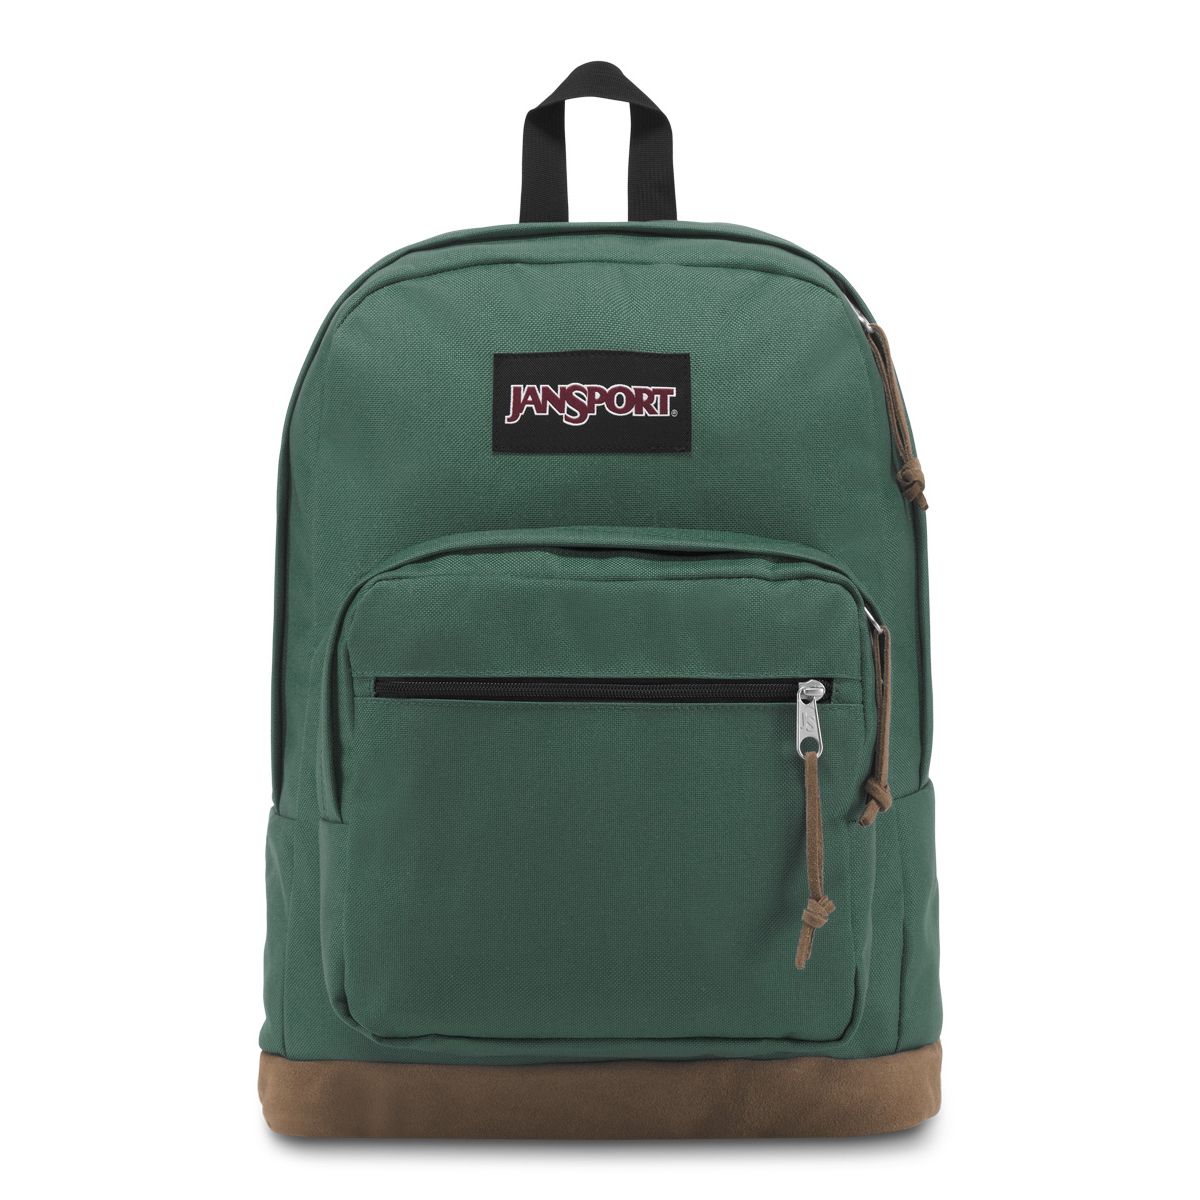 JanSport Right Pack Backpack in Blue Spruce Green | NEON